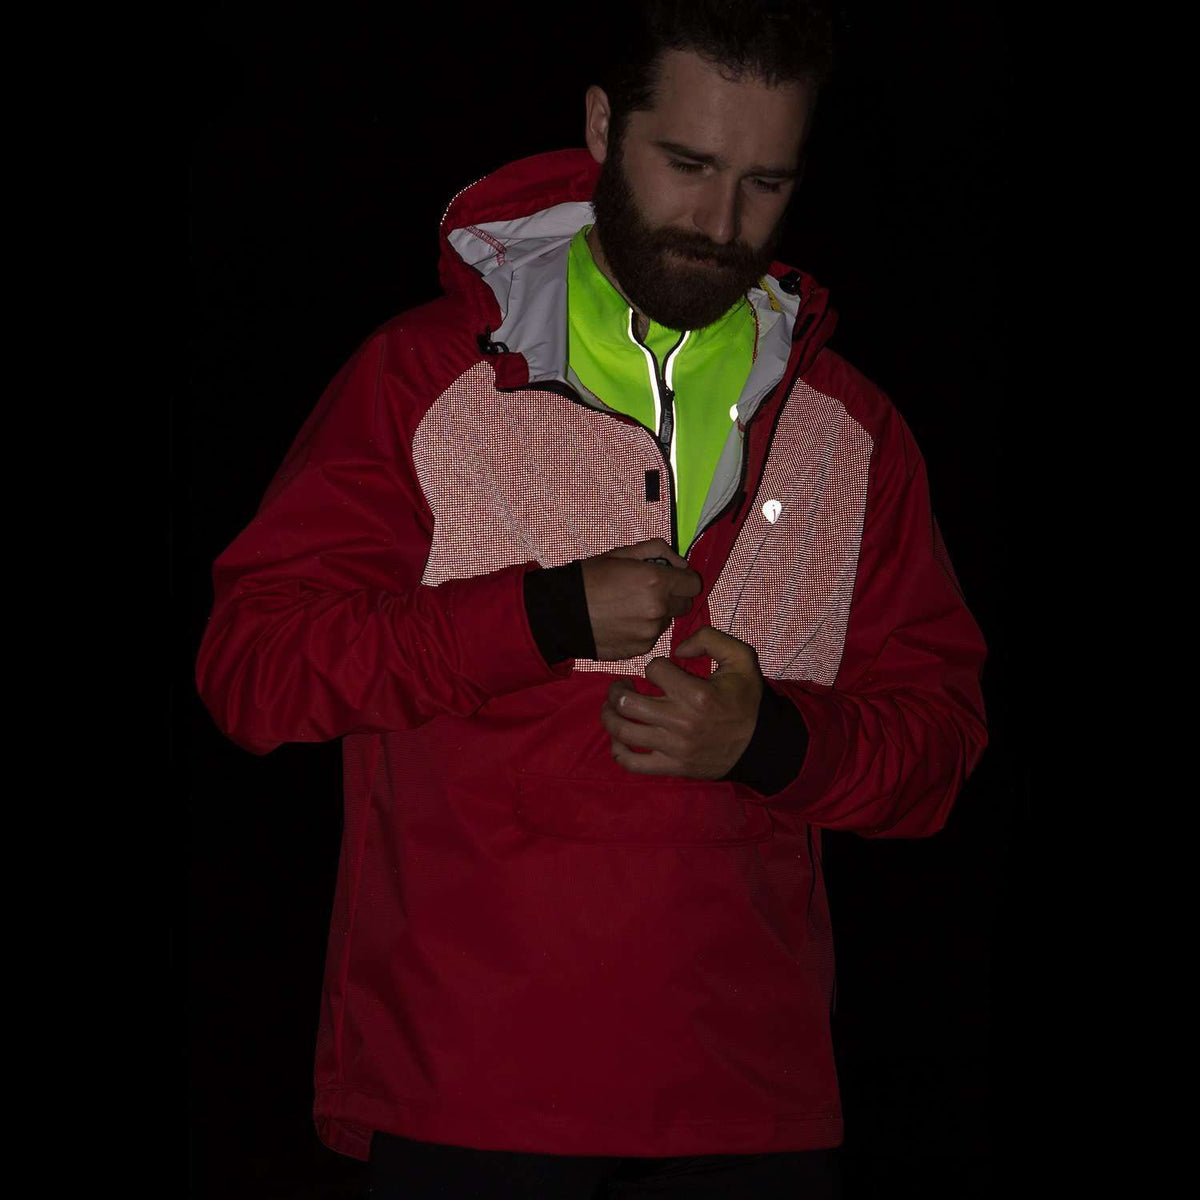 Falmouth Waterproof Reflective Men's Pullover Jacket in Red